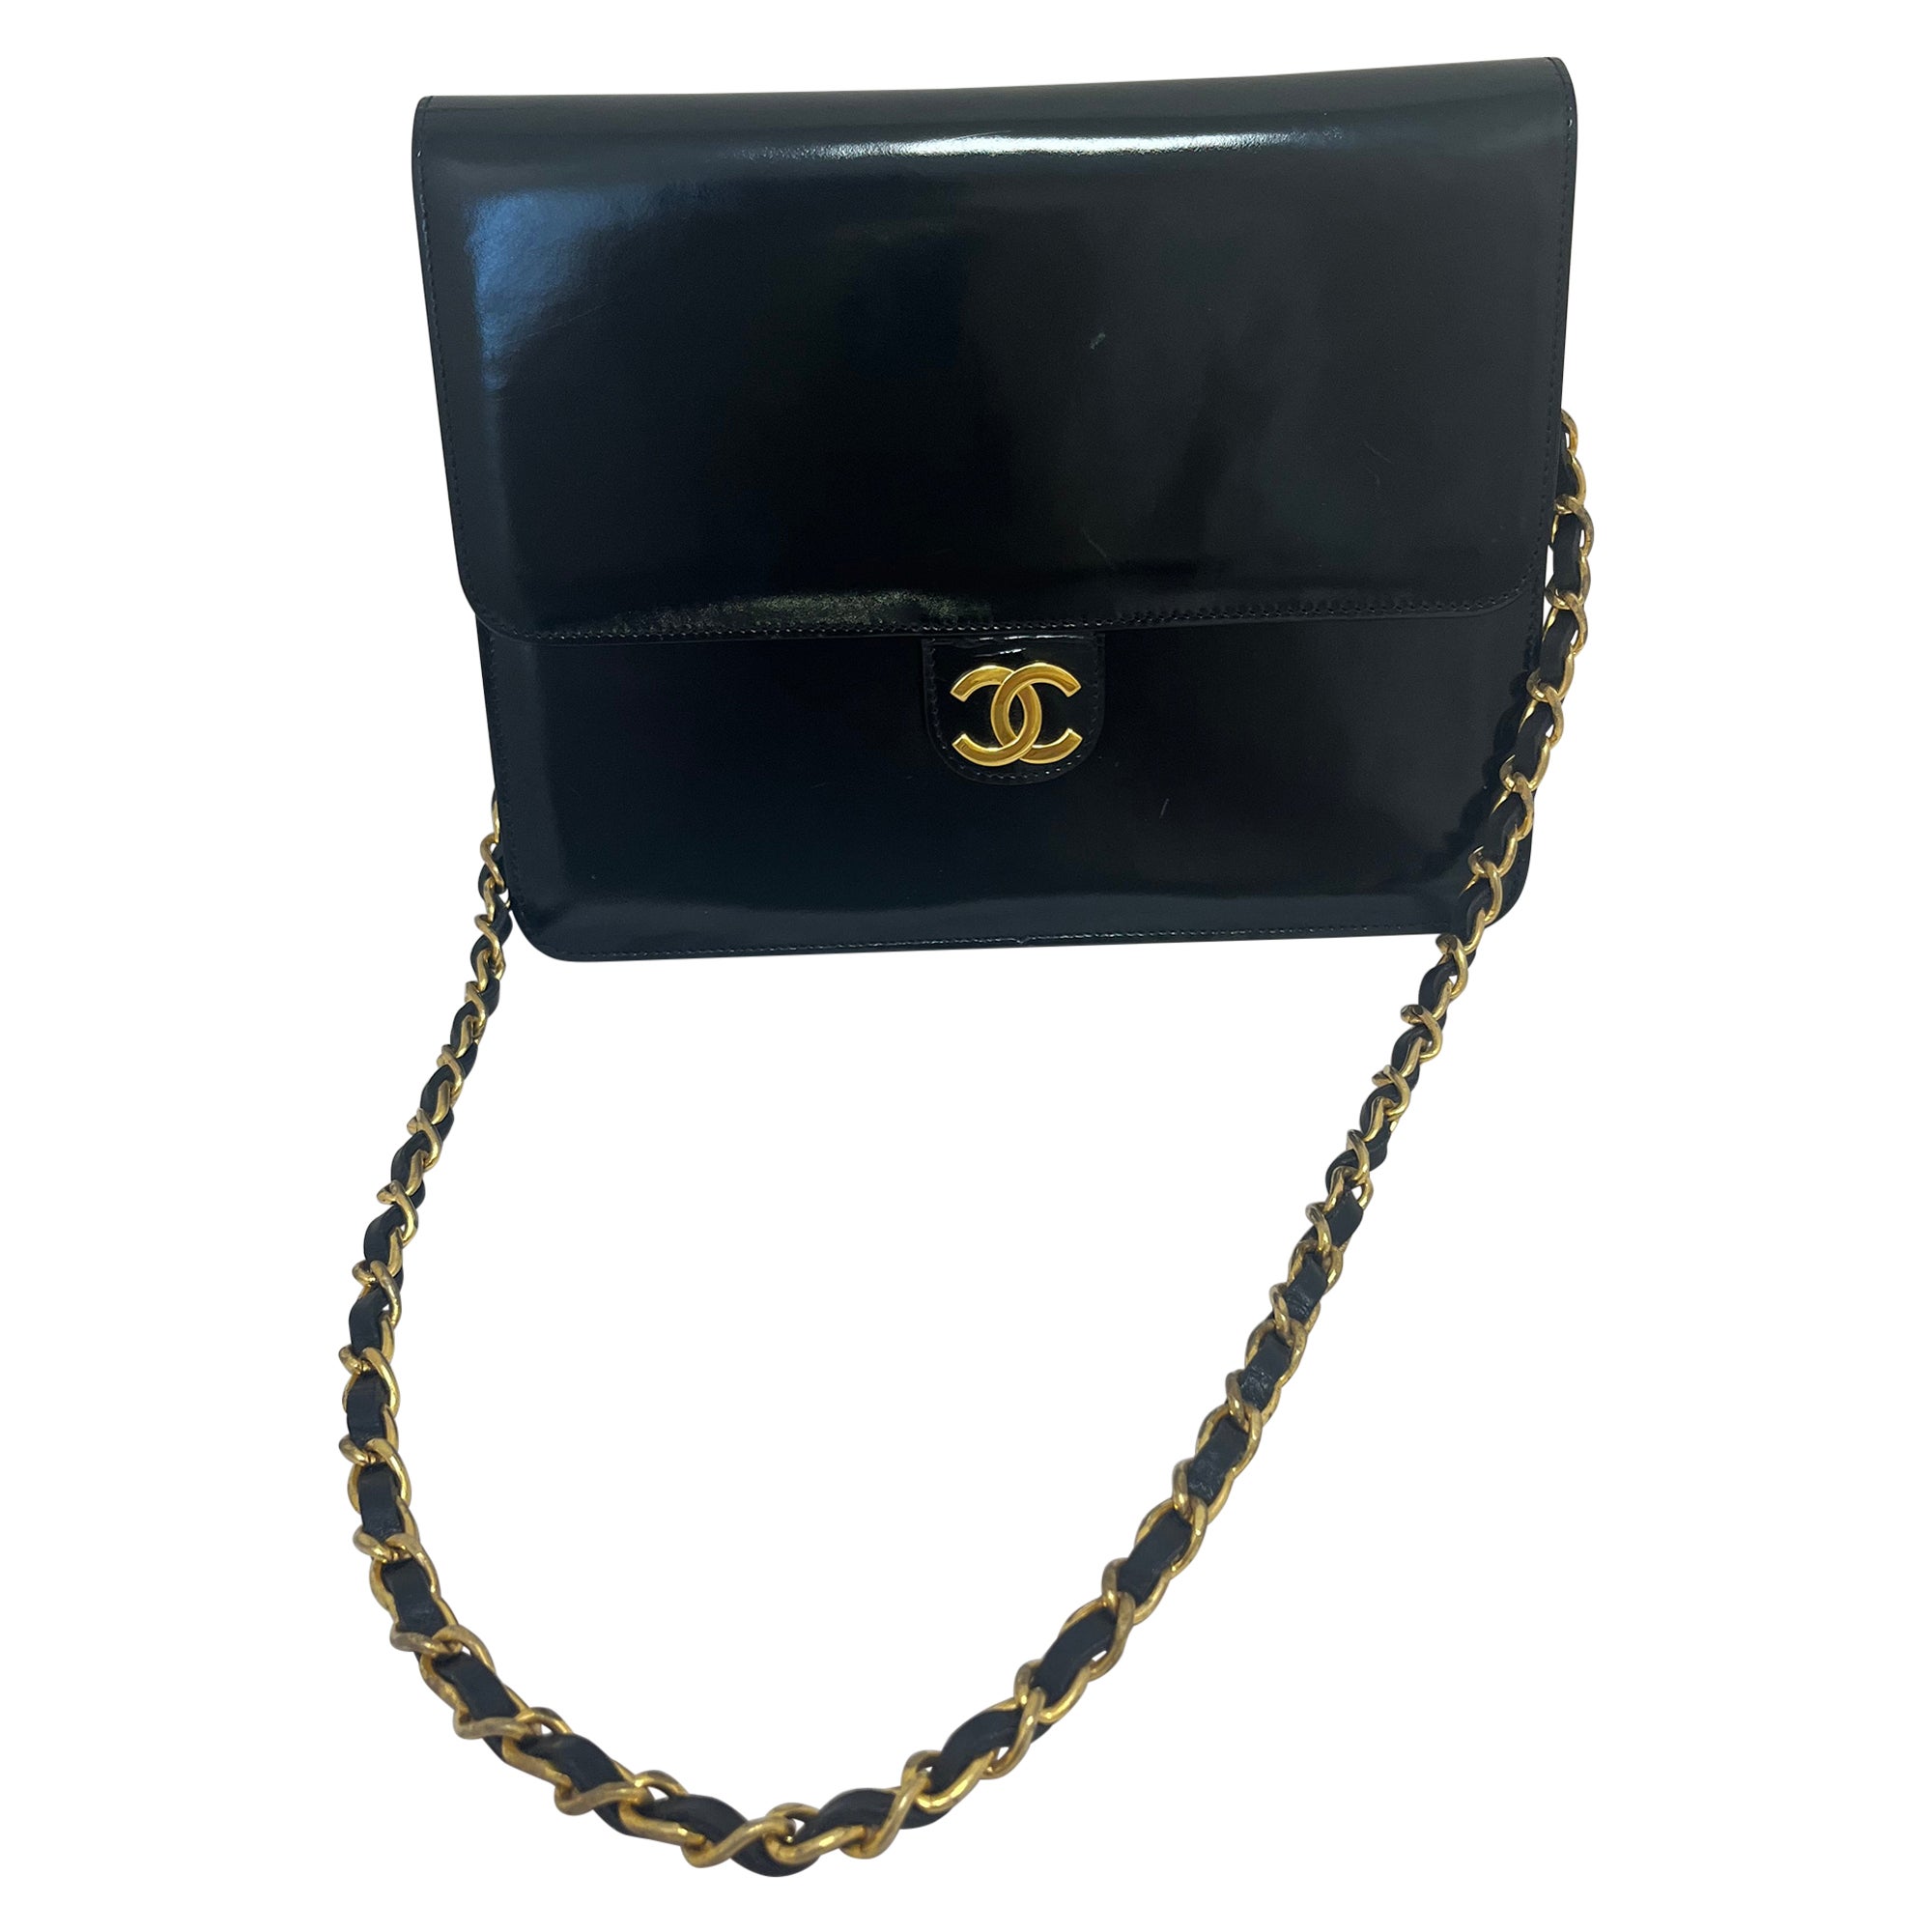 How much was a Chanel bag in the 1950s?